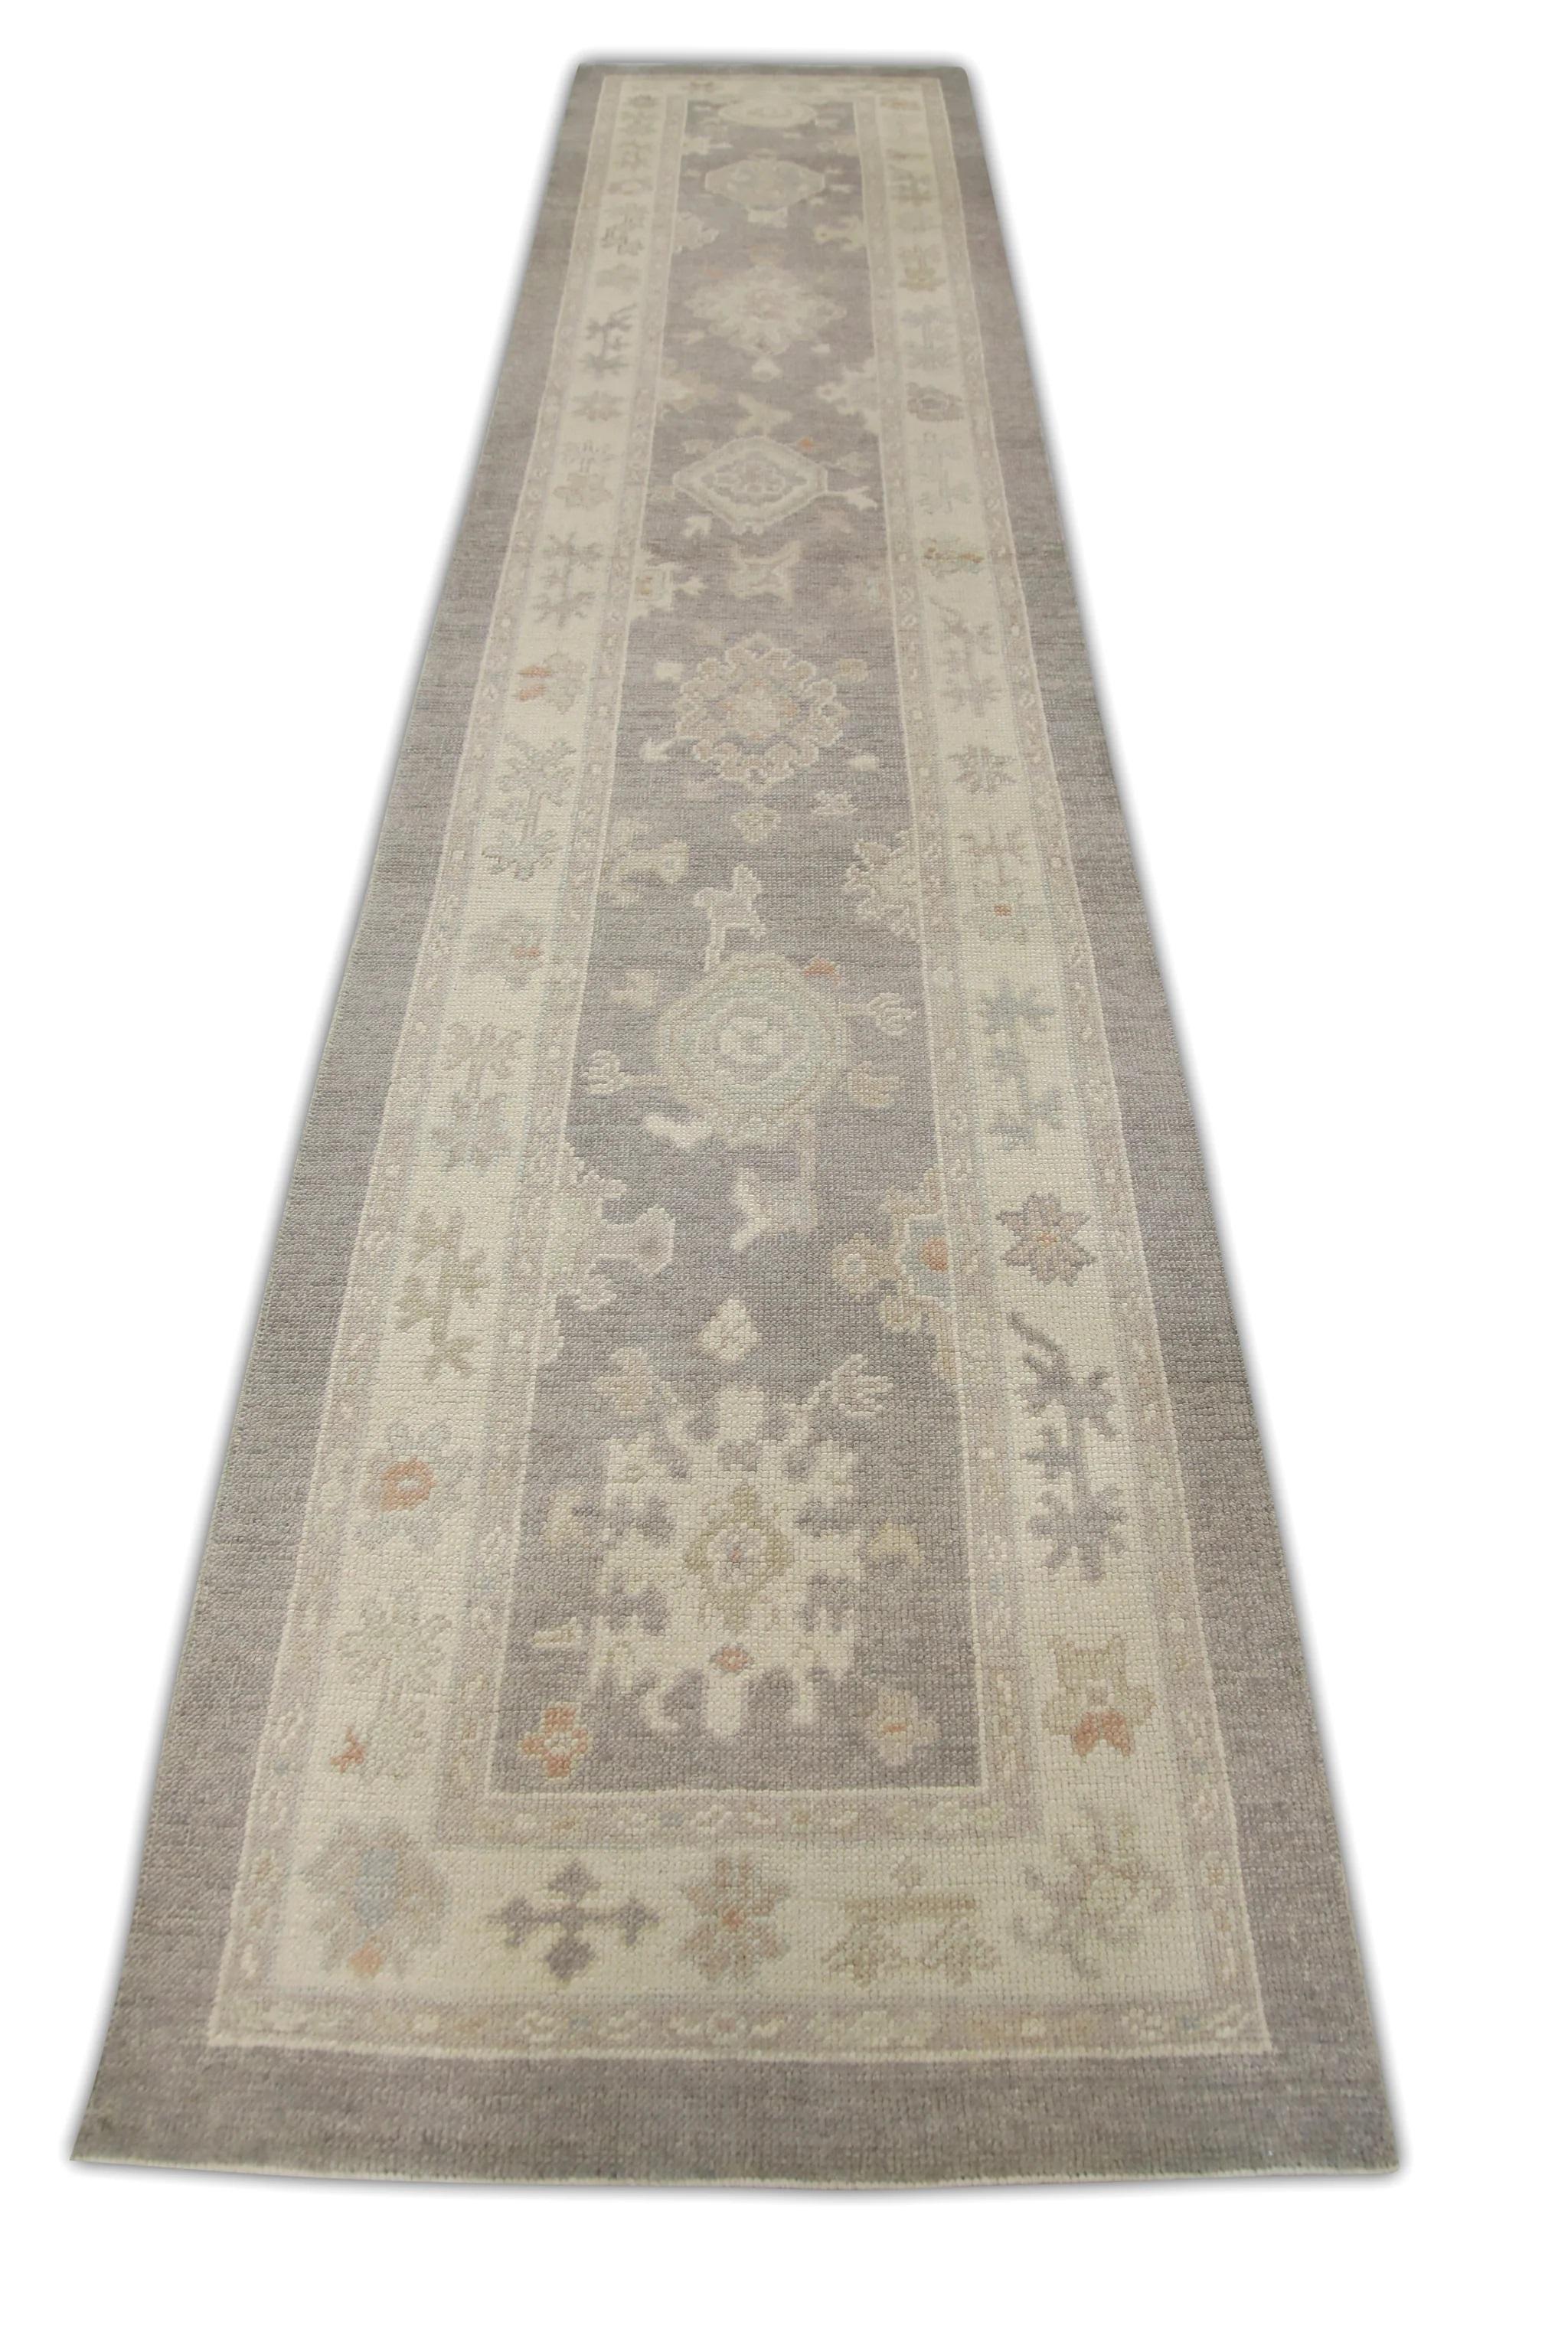 This modern Turkish oushak rug is a stunning piece of art that has been handwoven using traditional techniques by skilled artisans. The rug features intricate patterns and a soft color palette that is achieved through the use of natural vegetable